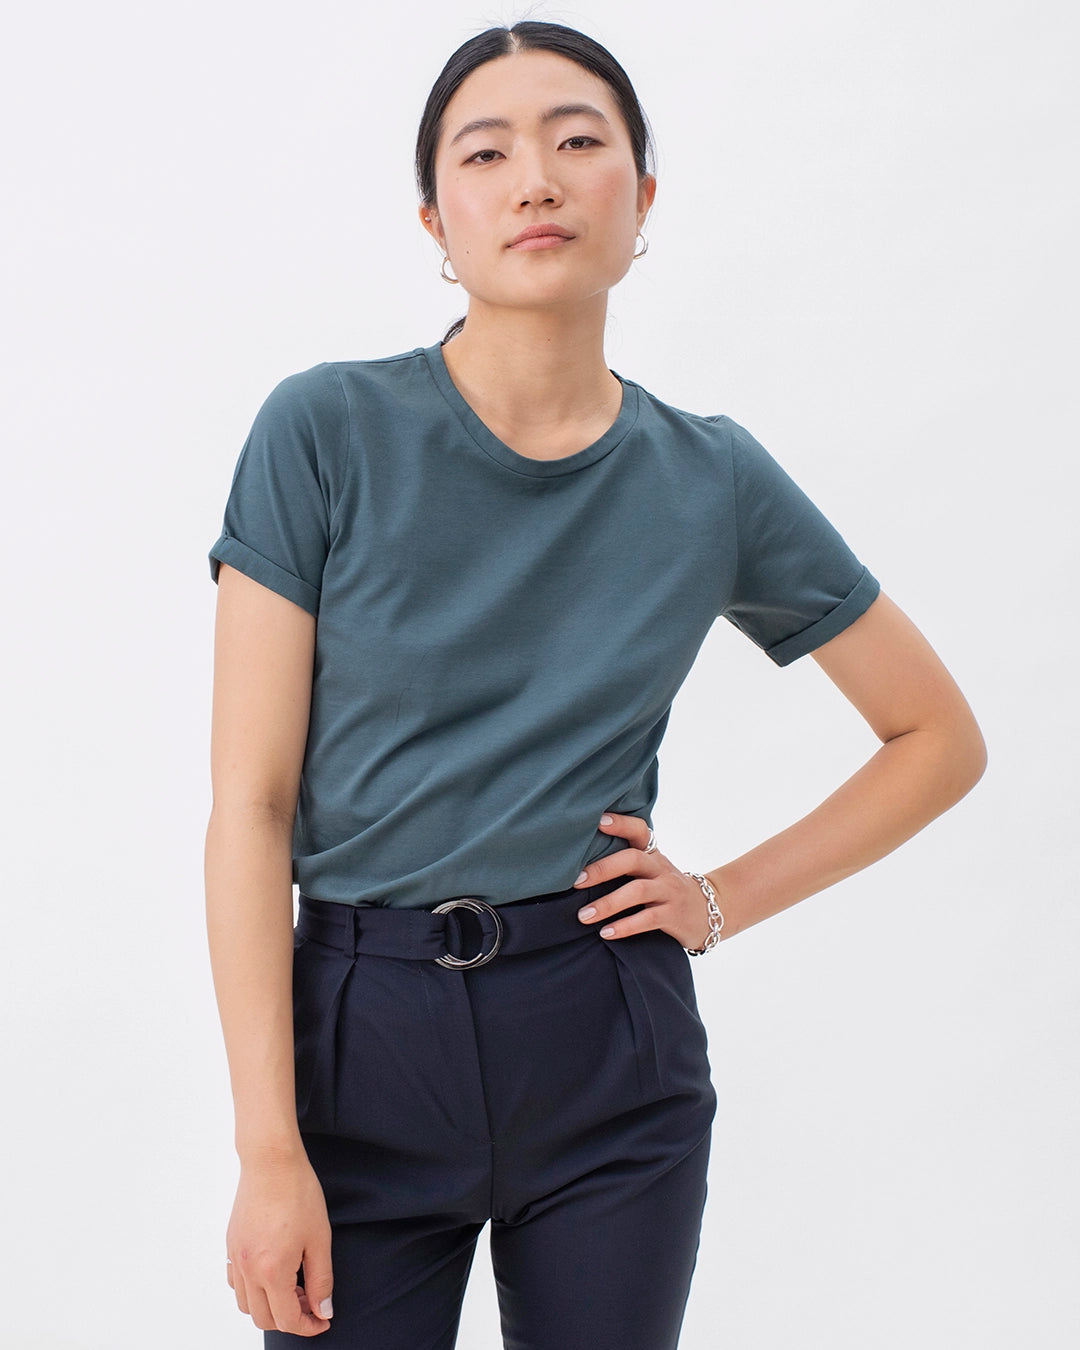 17h10_tshirt_tailleur_woman_green_cotton_organic_bots_color_comfortable_natural_material_ethic_decontract_tailleur